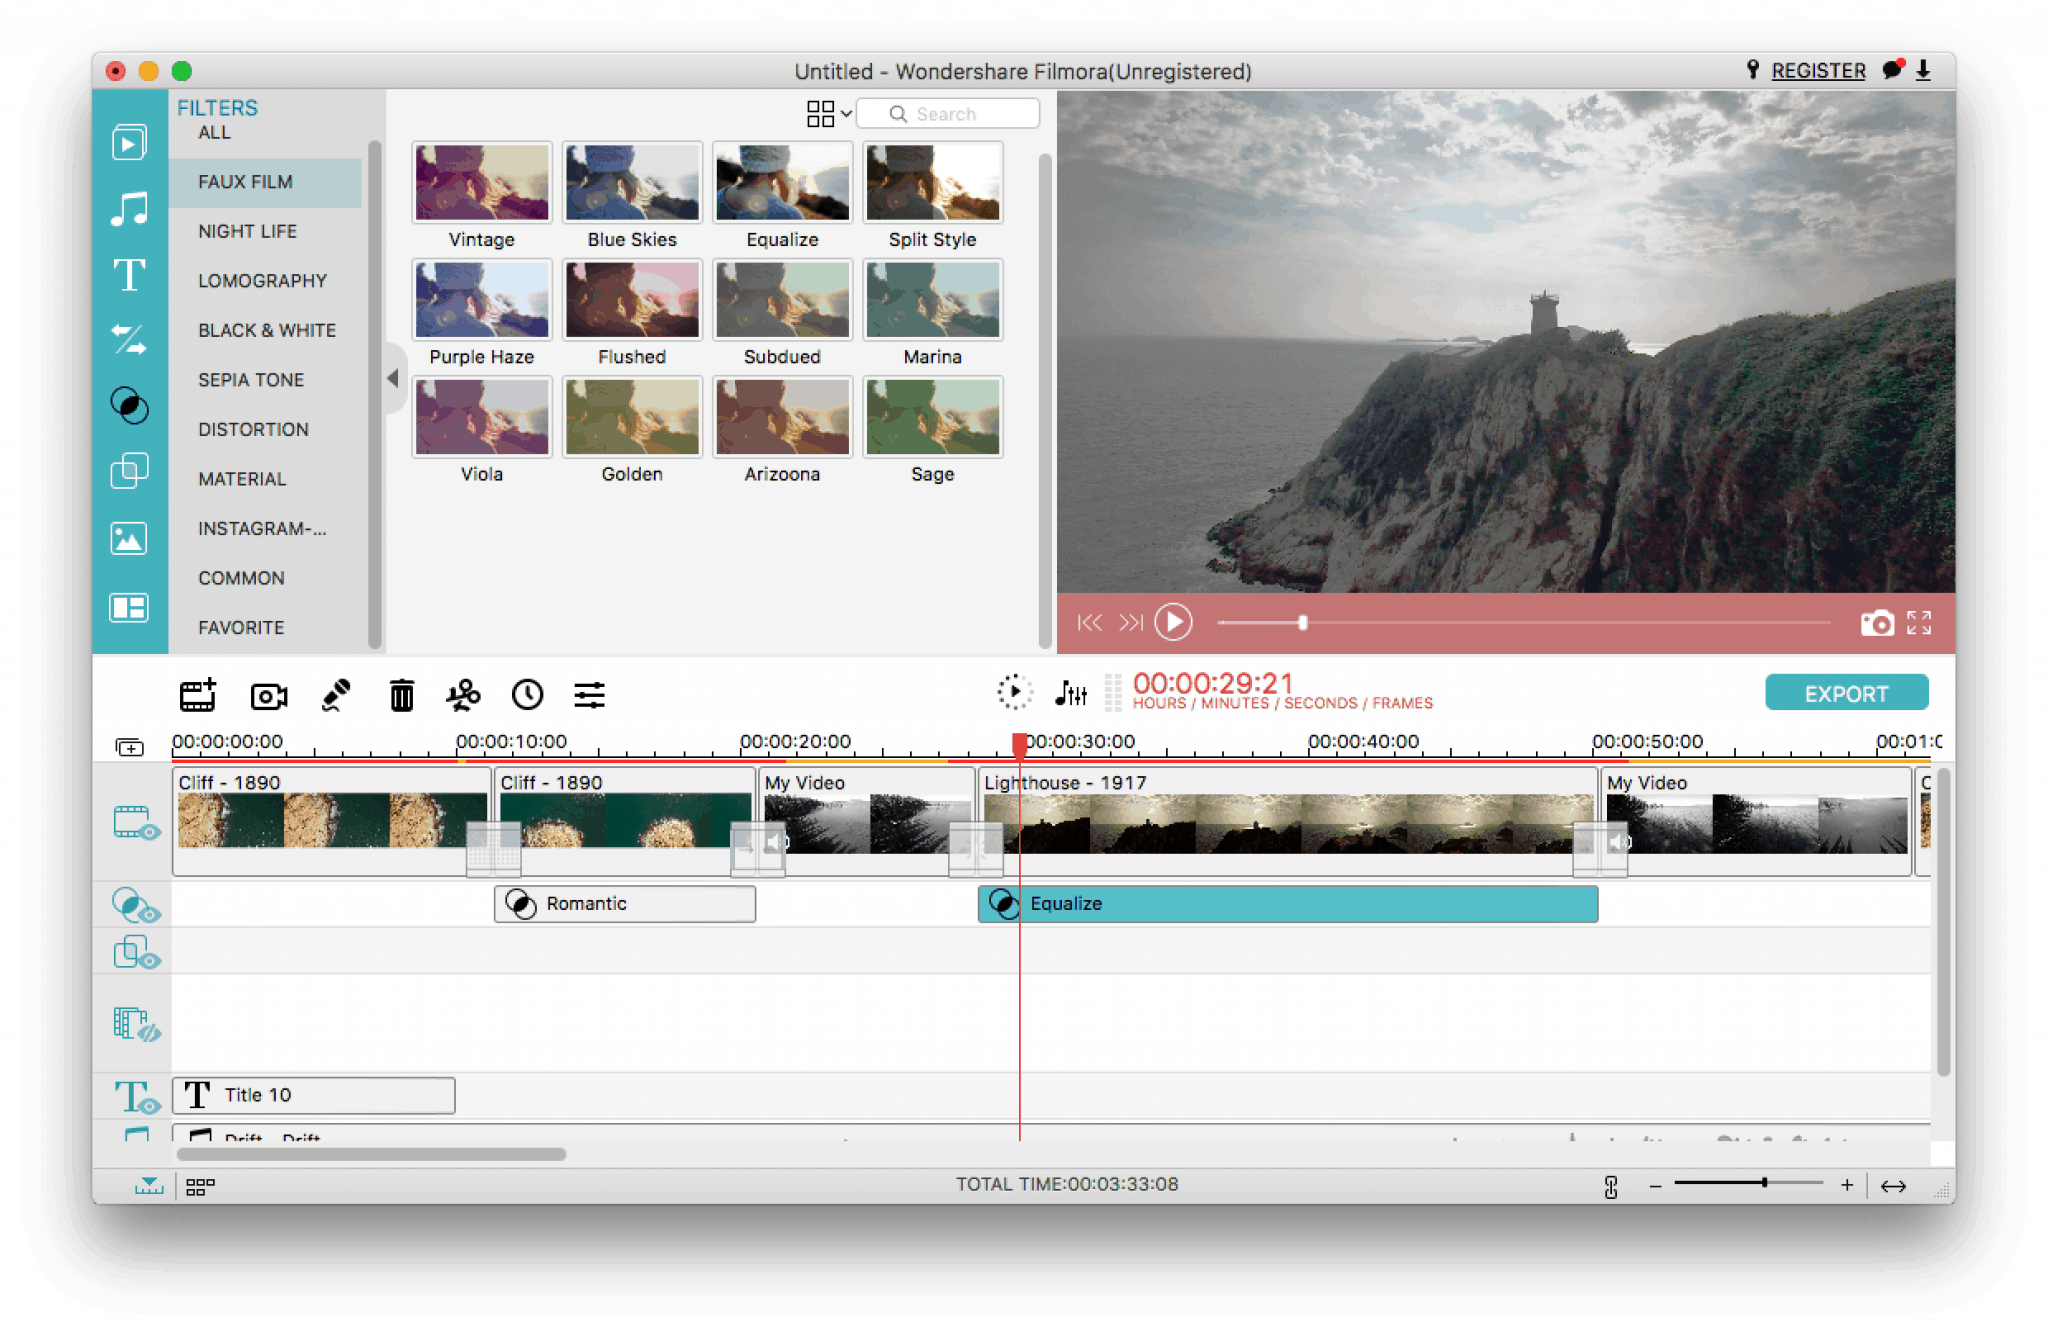 editing software for mac os x 10.7.5